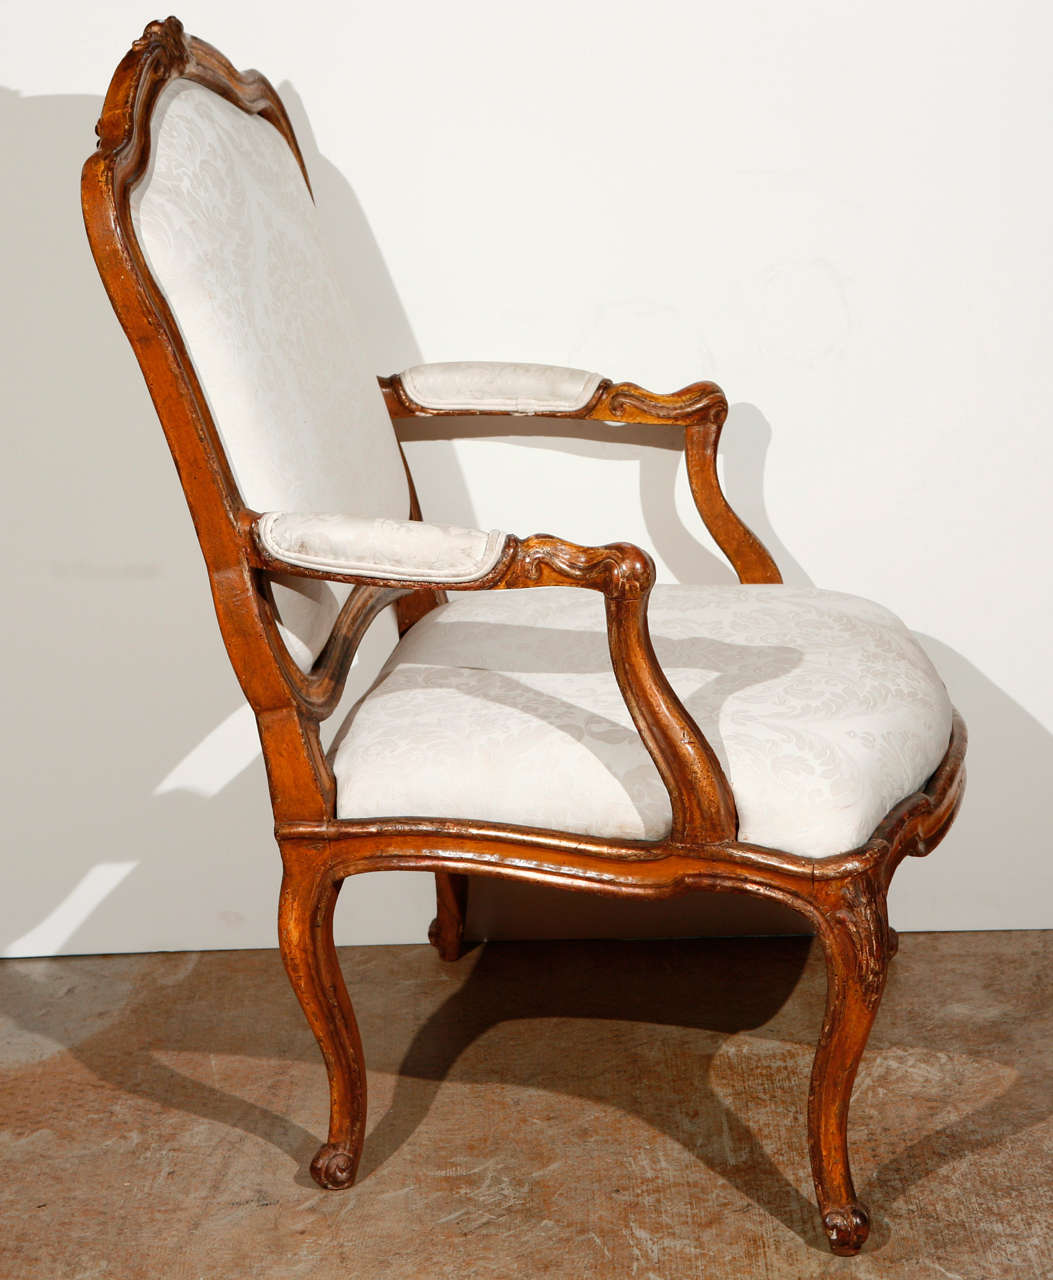 18th Century and Earlier 18th c., Italian Rococo-style Chair For Sale